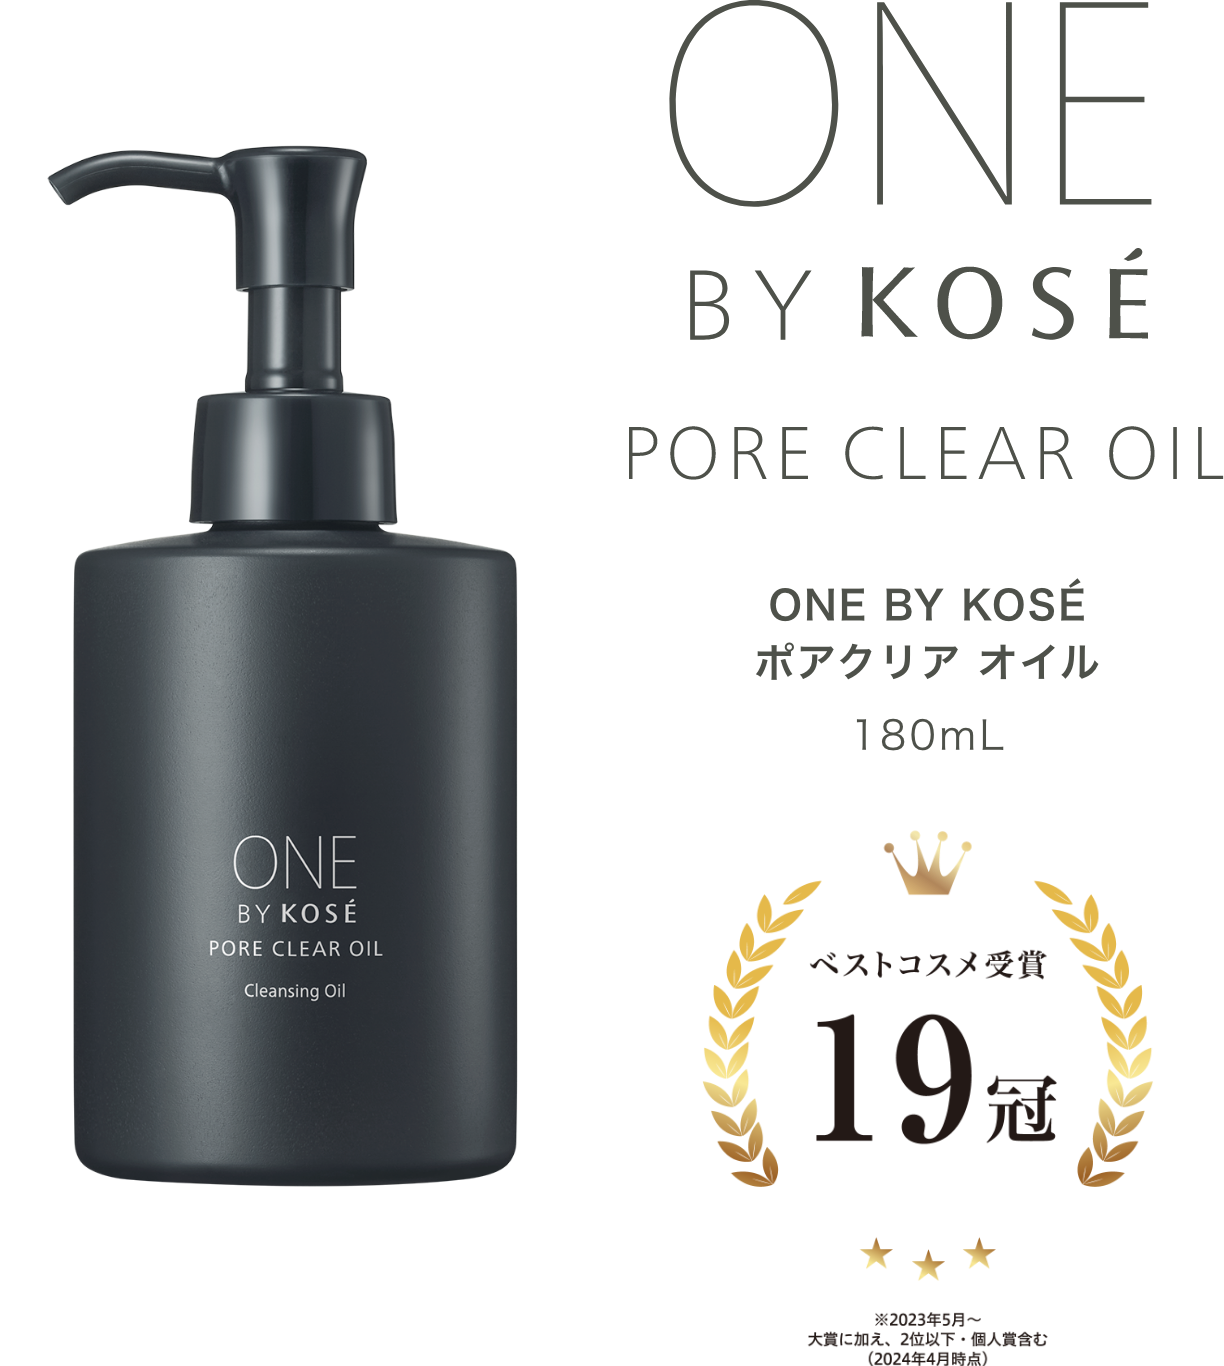 ONE BY KOSE ポアクリア オイル 180ml - 基礎化粧品